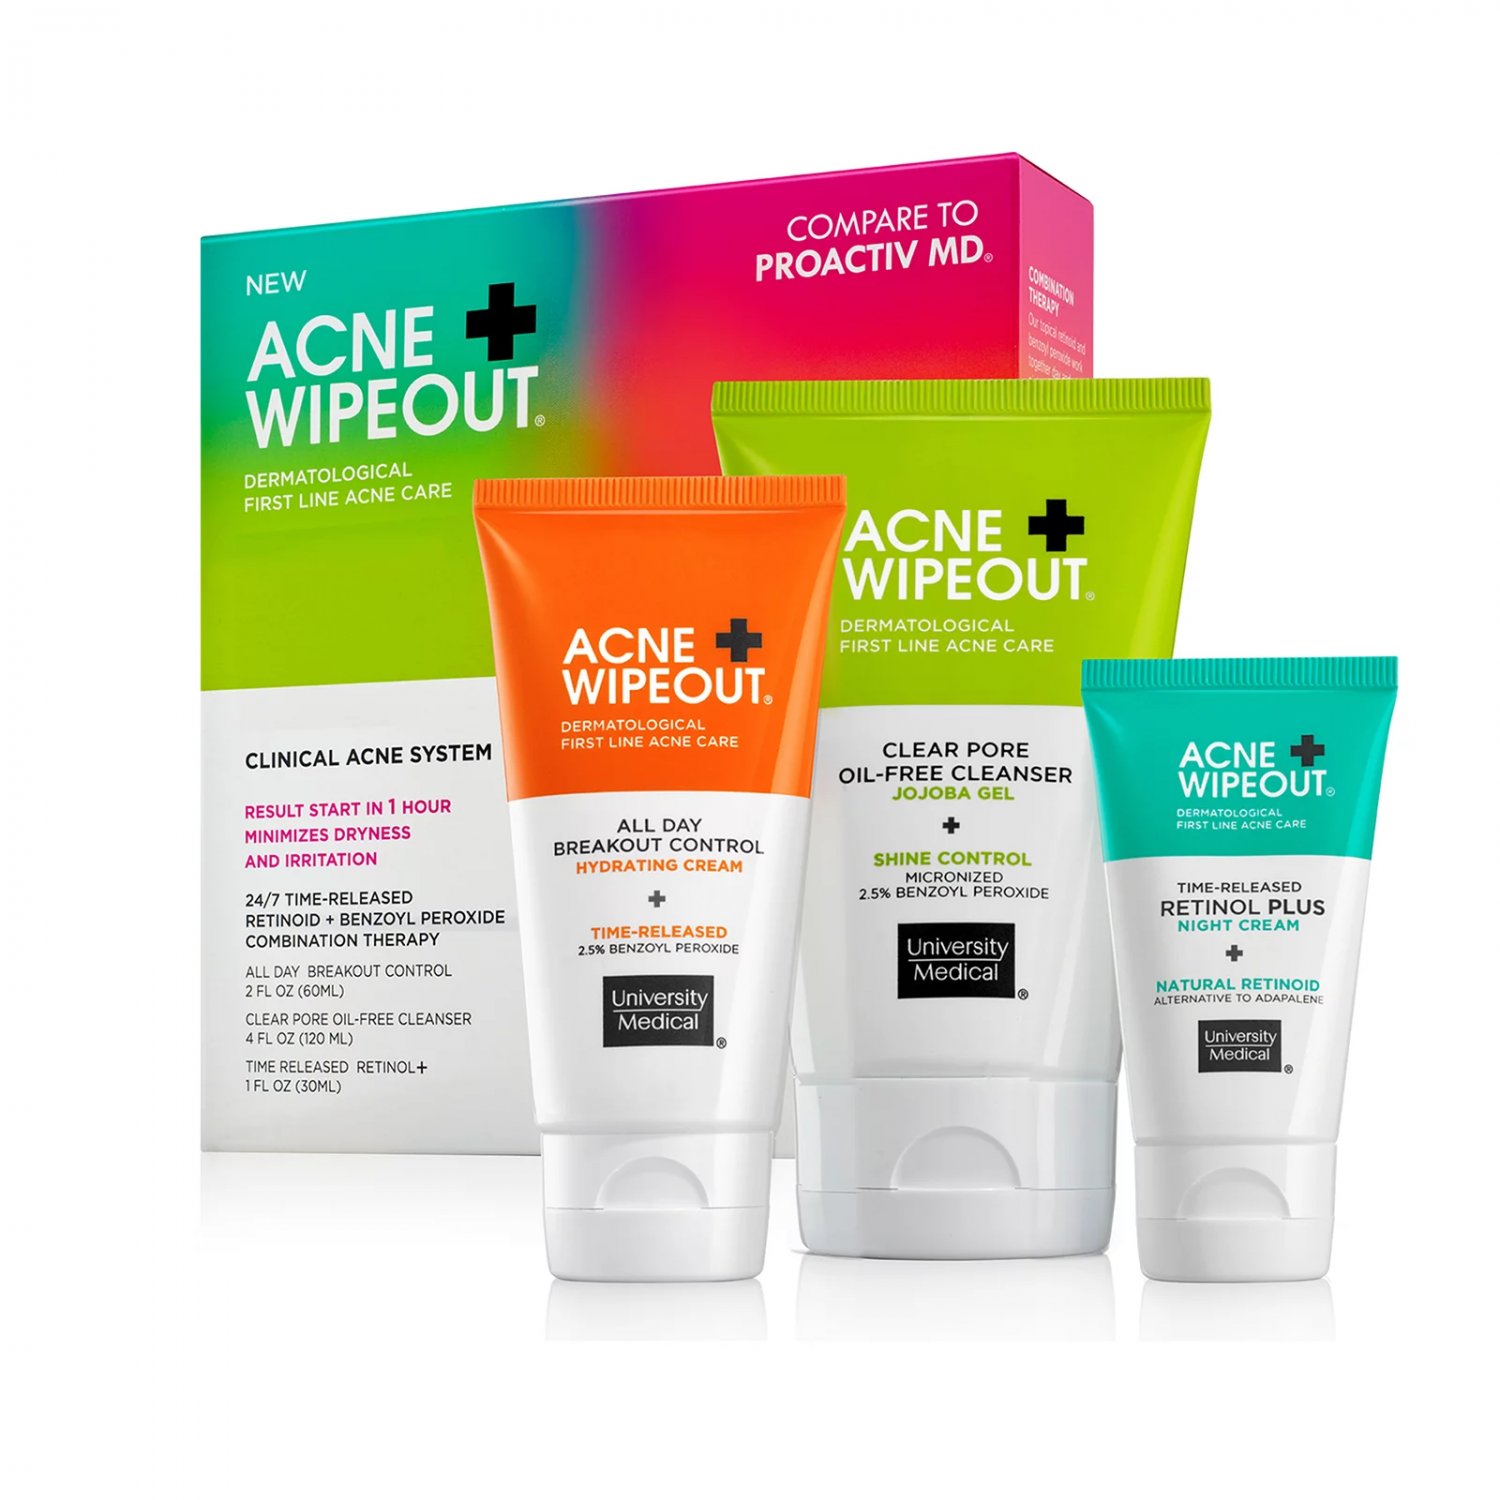 University Medical Clinical Acne System Acne Wipeout Kit, 3 Piece Set